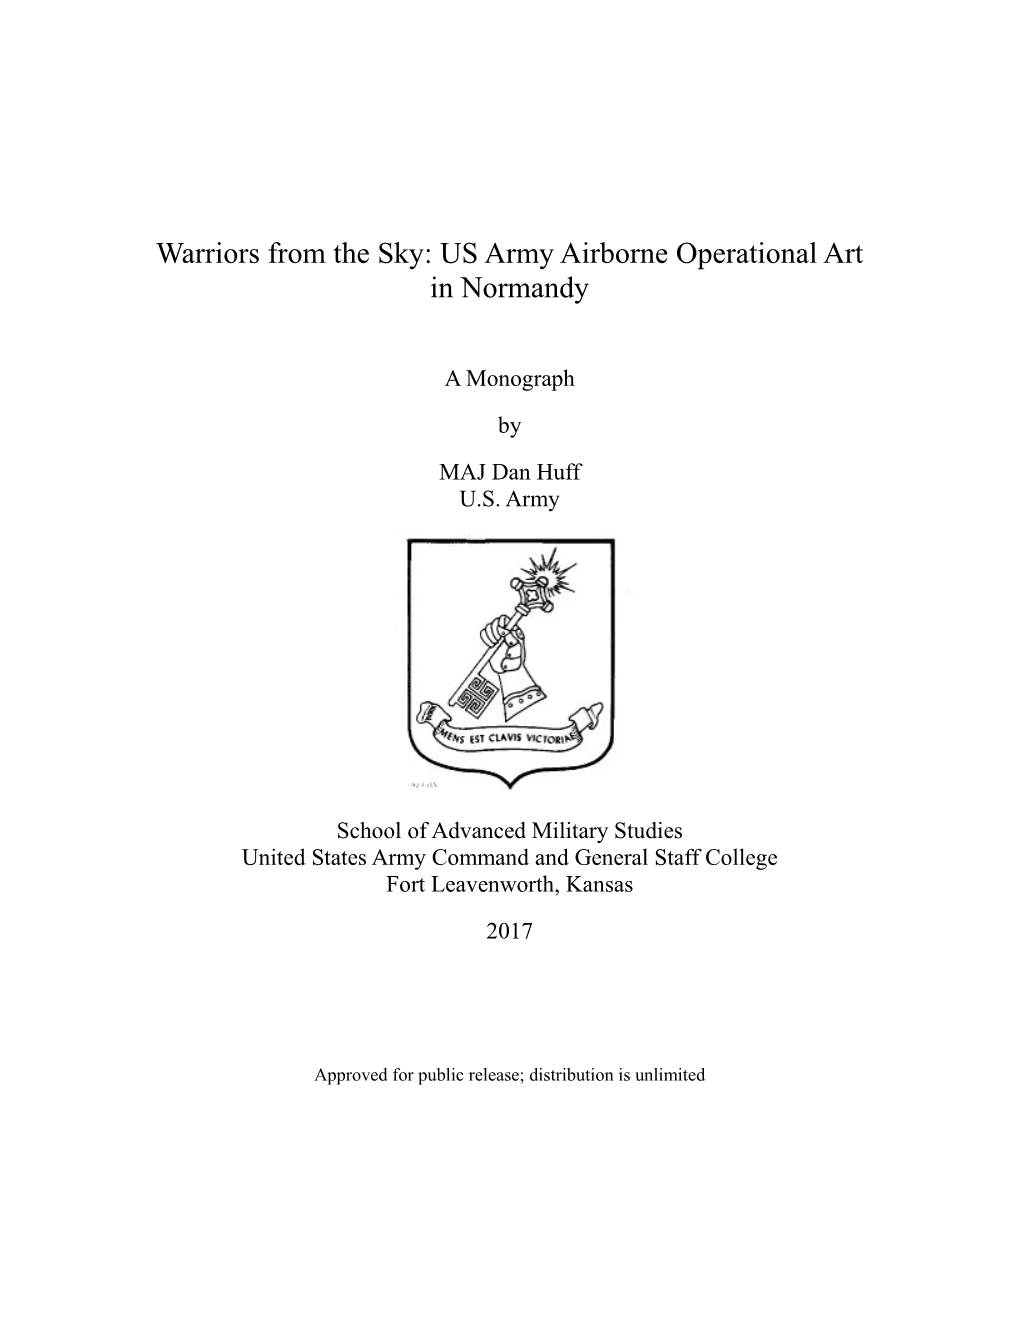 Warriors from the Sky: US Army Airborne Operational Art in Normandy